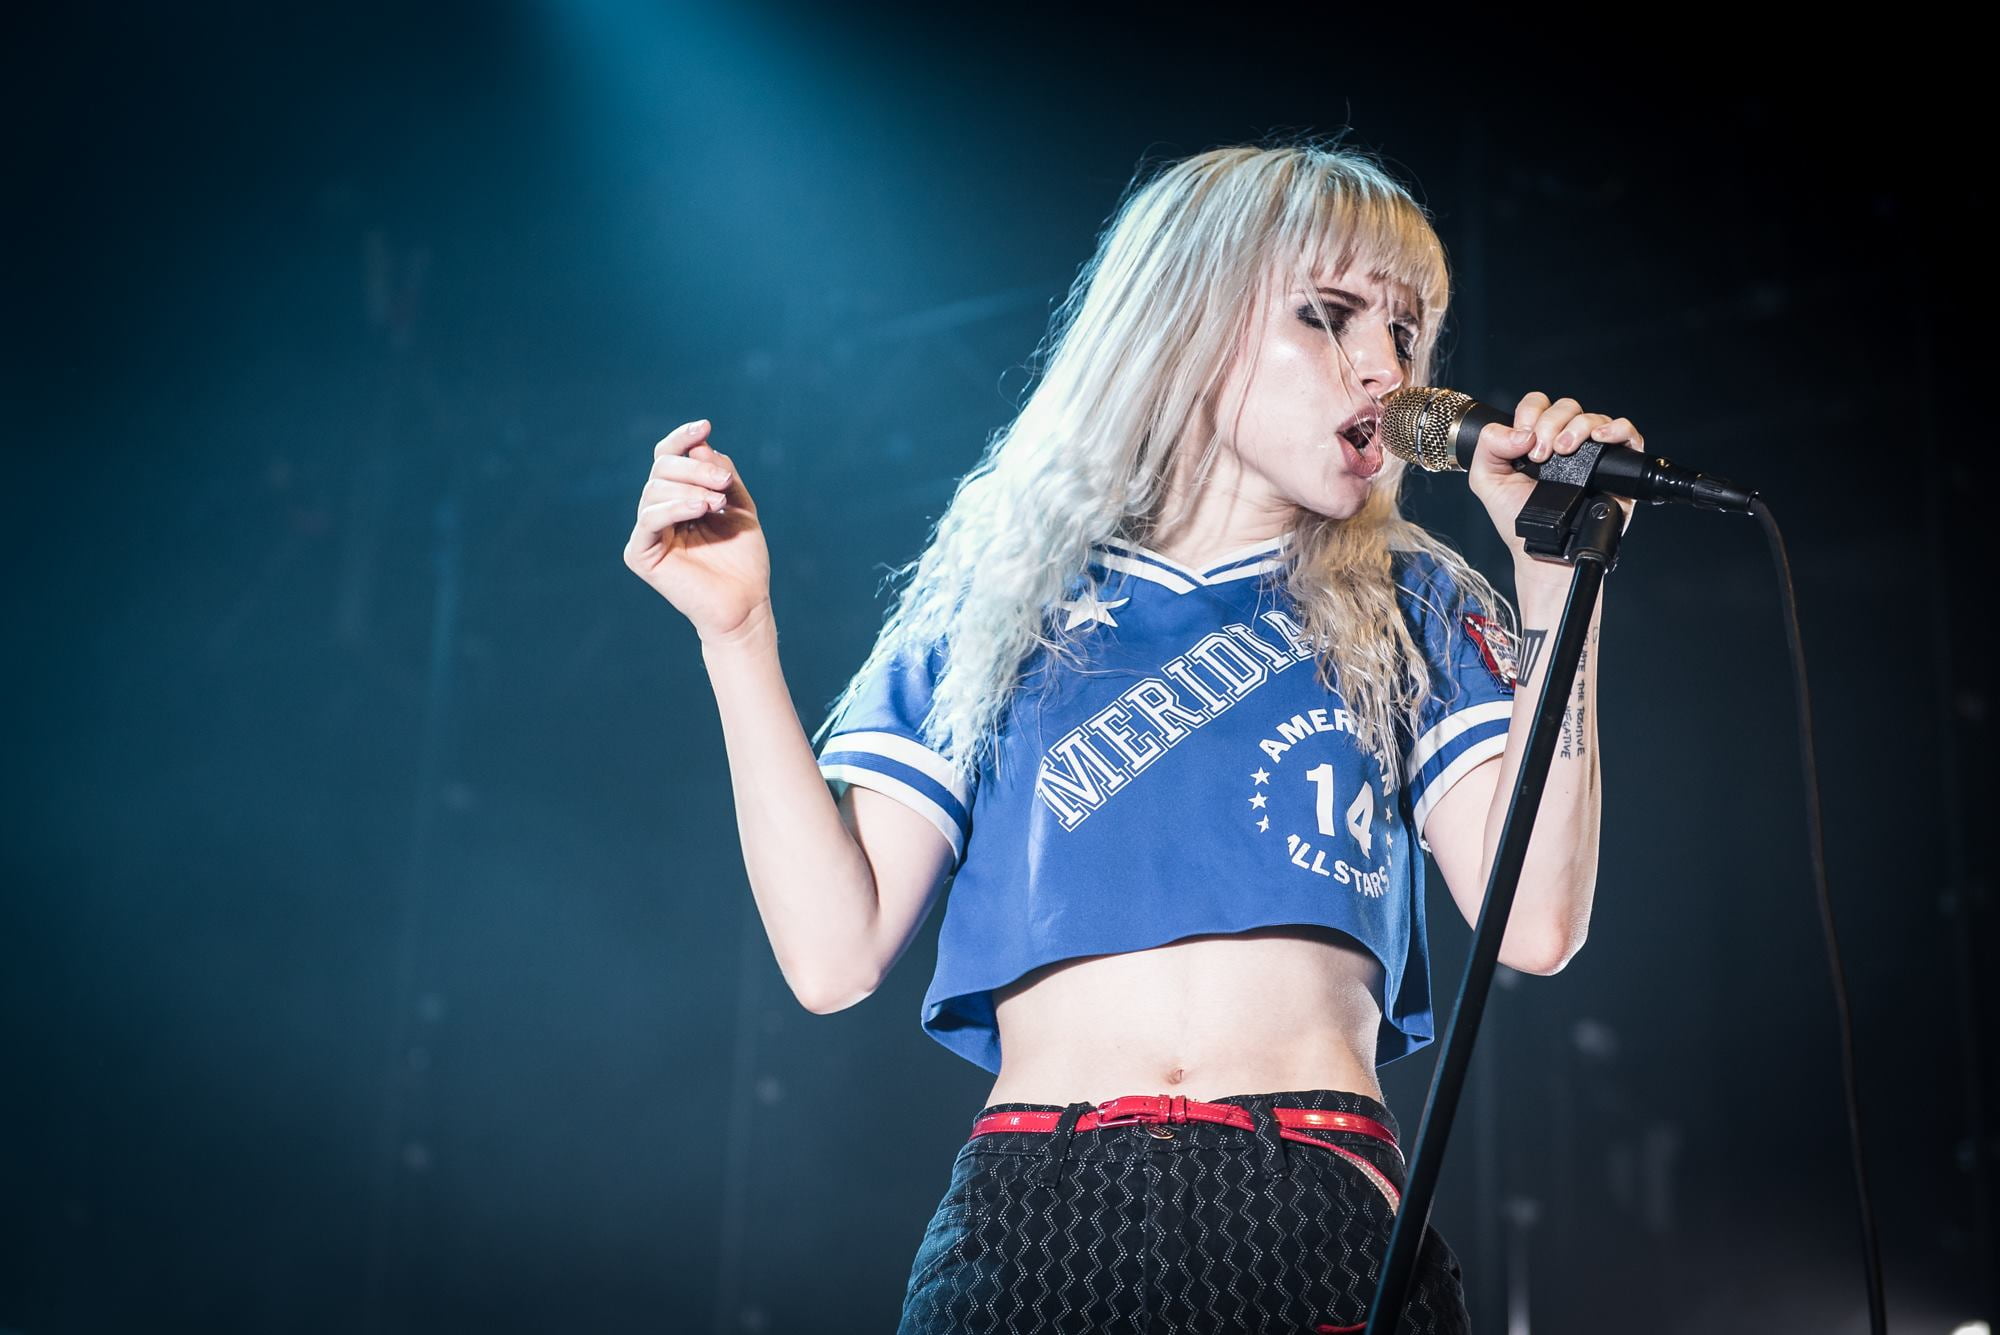 Hayley Williams, Paramore, concerts, blond hair, women, young adult